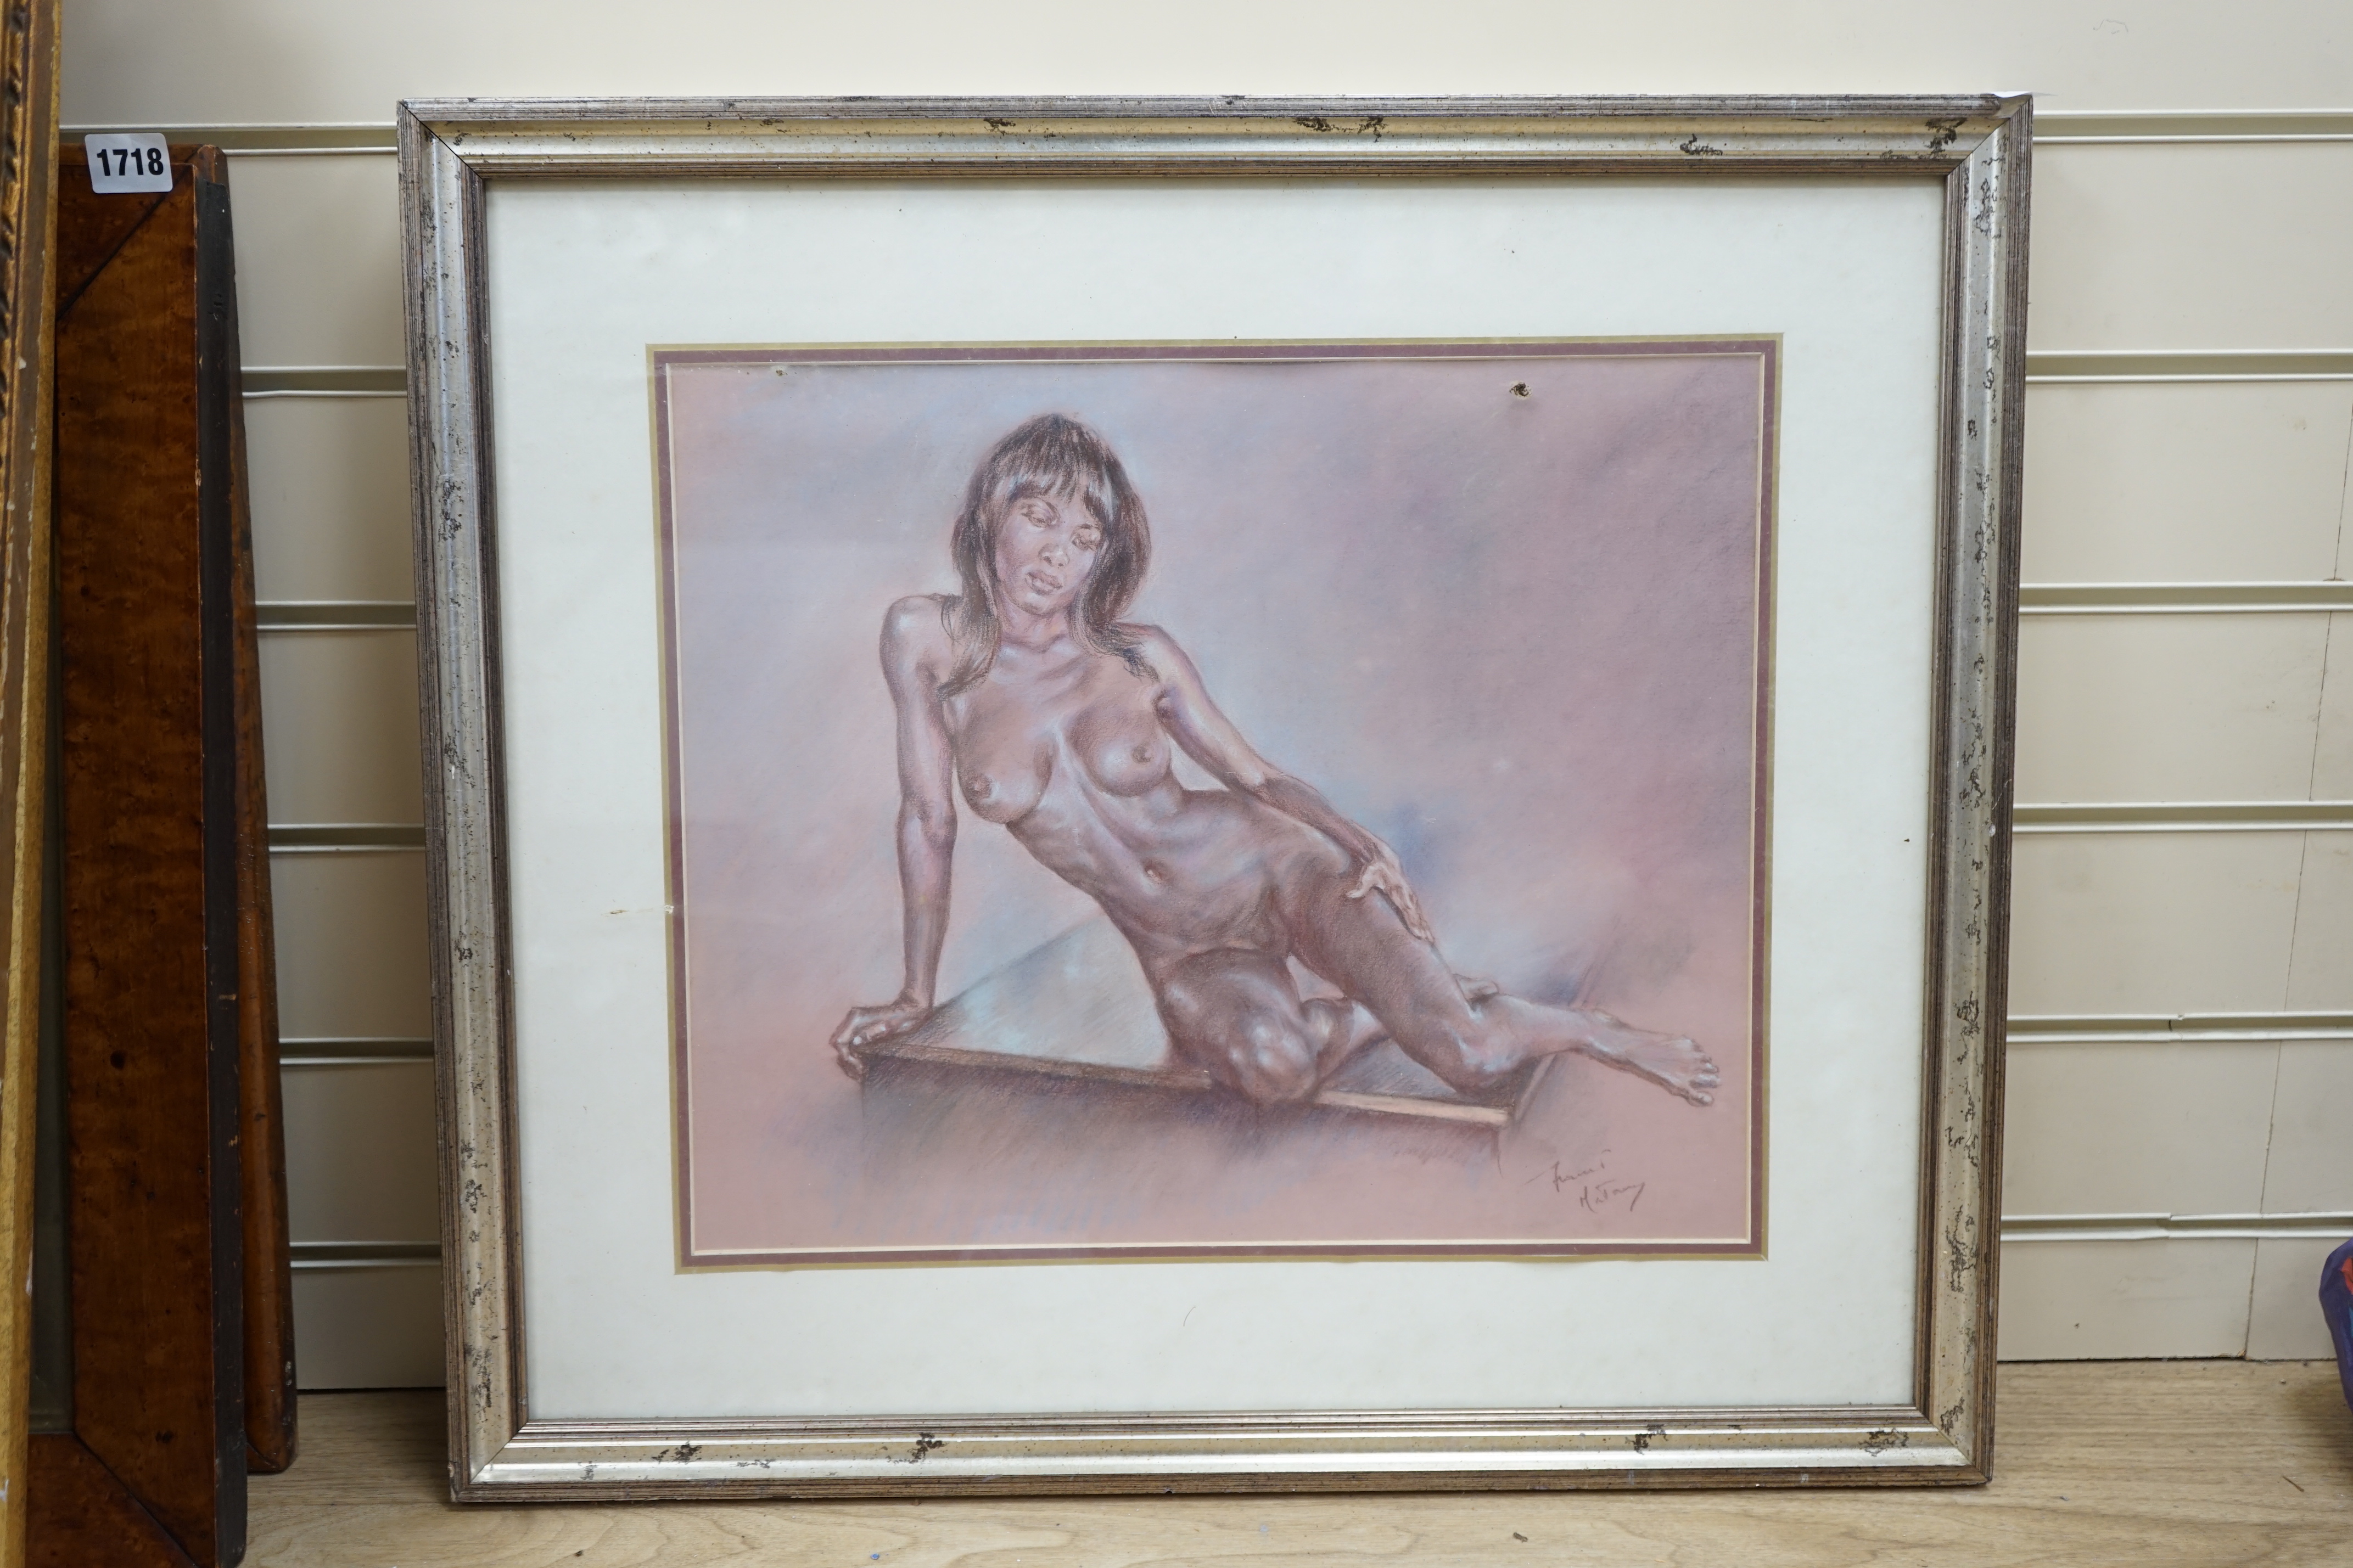 Franco Matania (1922-2006), heightened chalk, Study of a nude woman, signed, 37 x 45cm